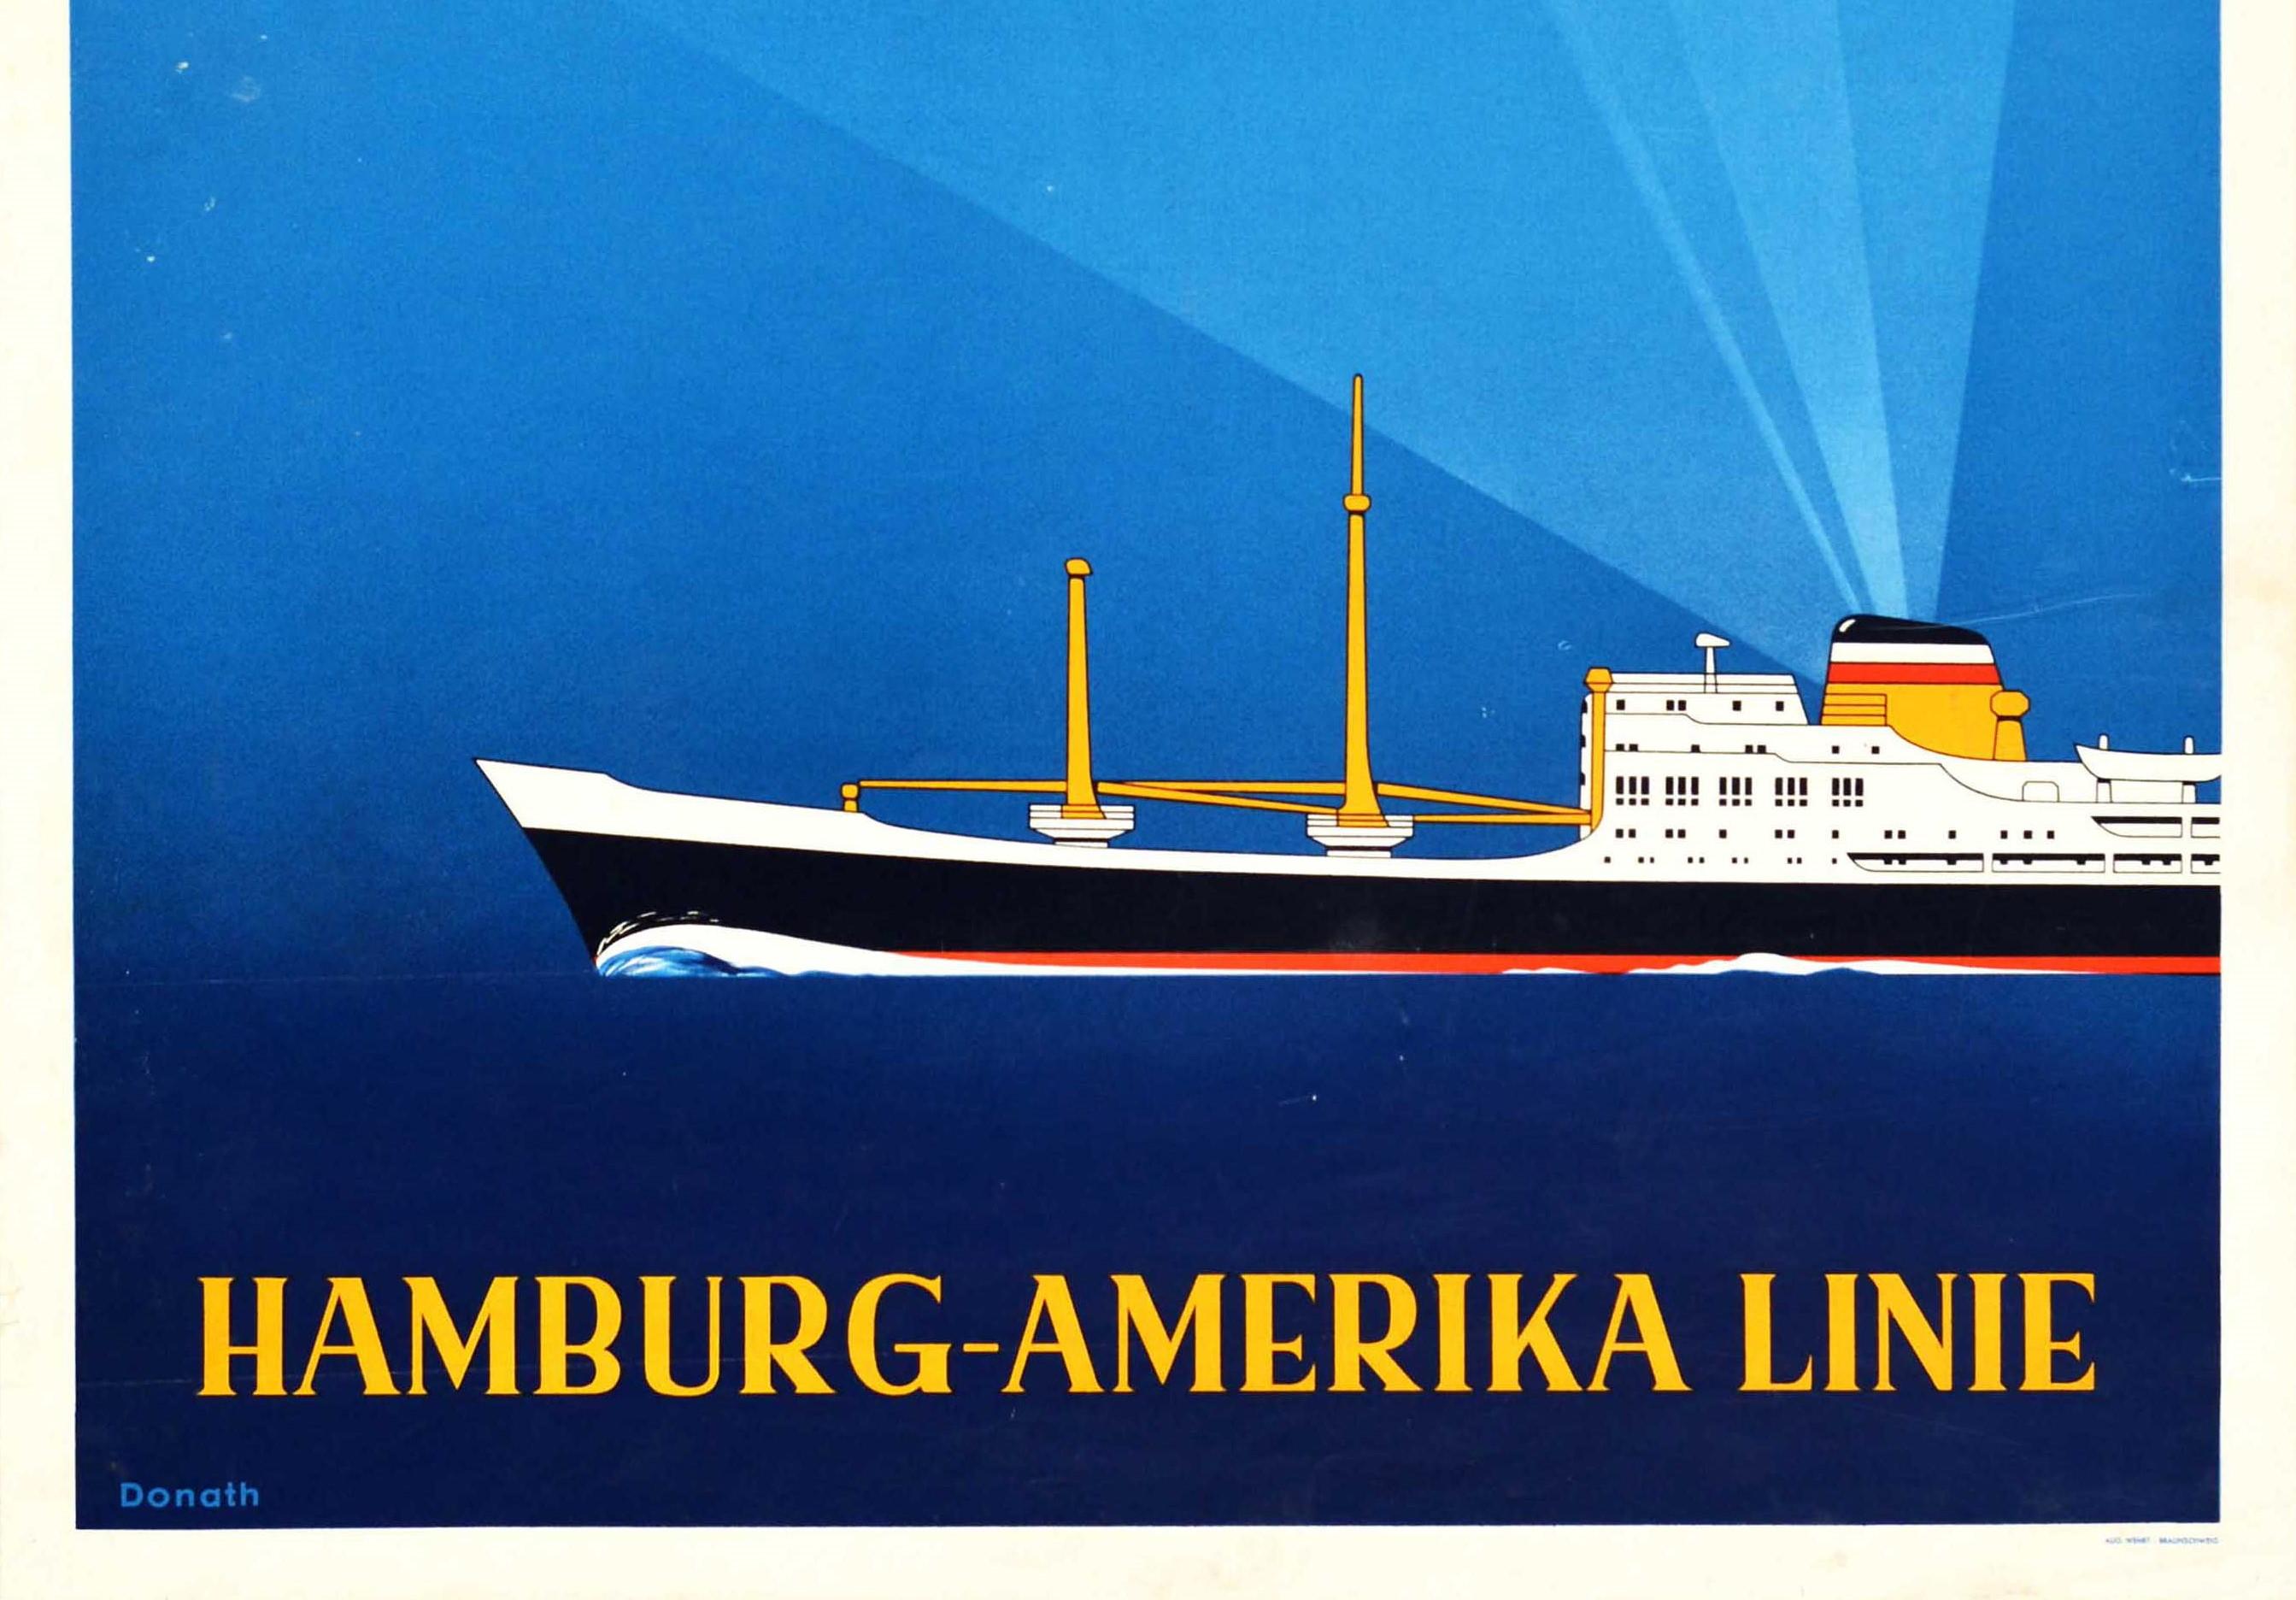 Original vintage cruise travel poster for the Hamburg-Amerika Linie Schnell Sicher Zuverlassig / Fast Safe Reliable featuring an ocean liner sailing across the blue background with the text and HAPAG logo above lit by rays from the ship funnel and